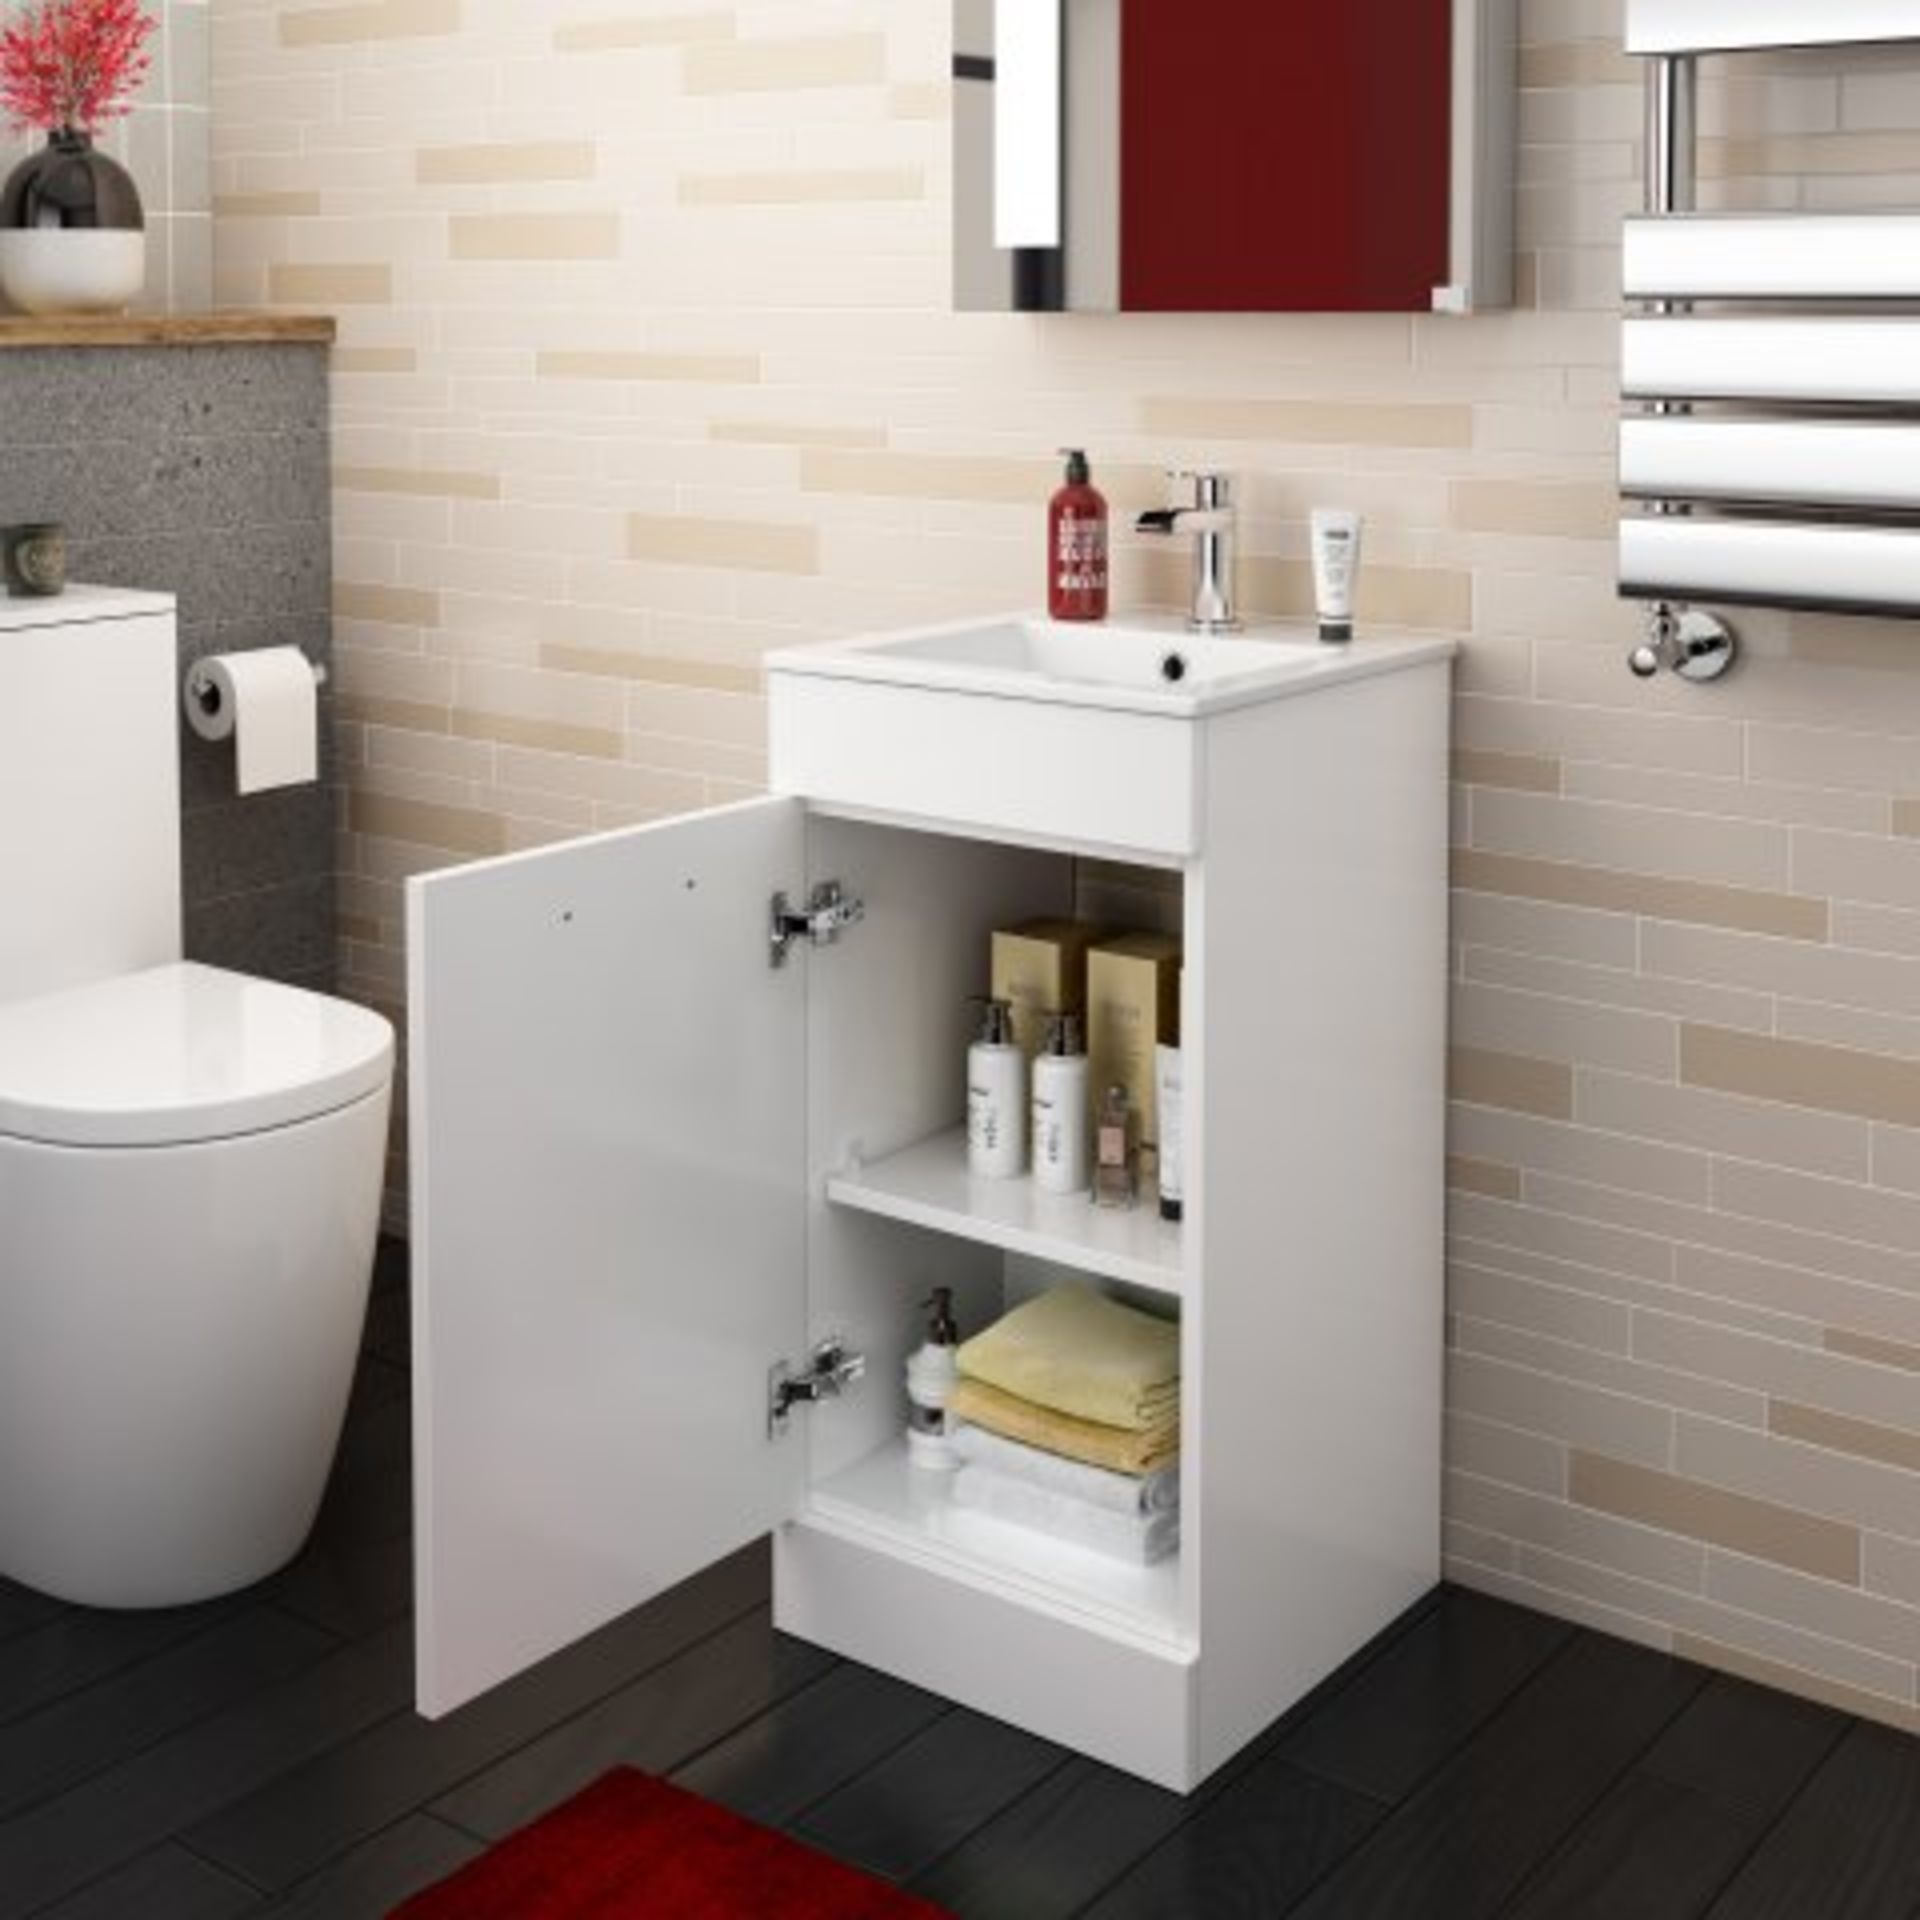 (I60) 400mm Severn High Gloss White Cloakroom Basin Cabinet - Floor Standing. RRP £212.99. COMES - Bild 2 aus 4